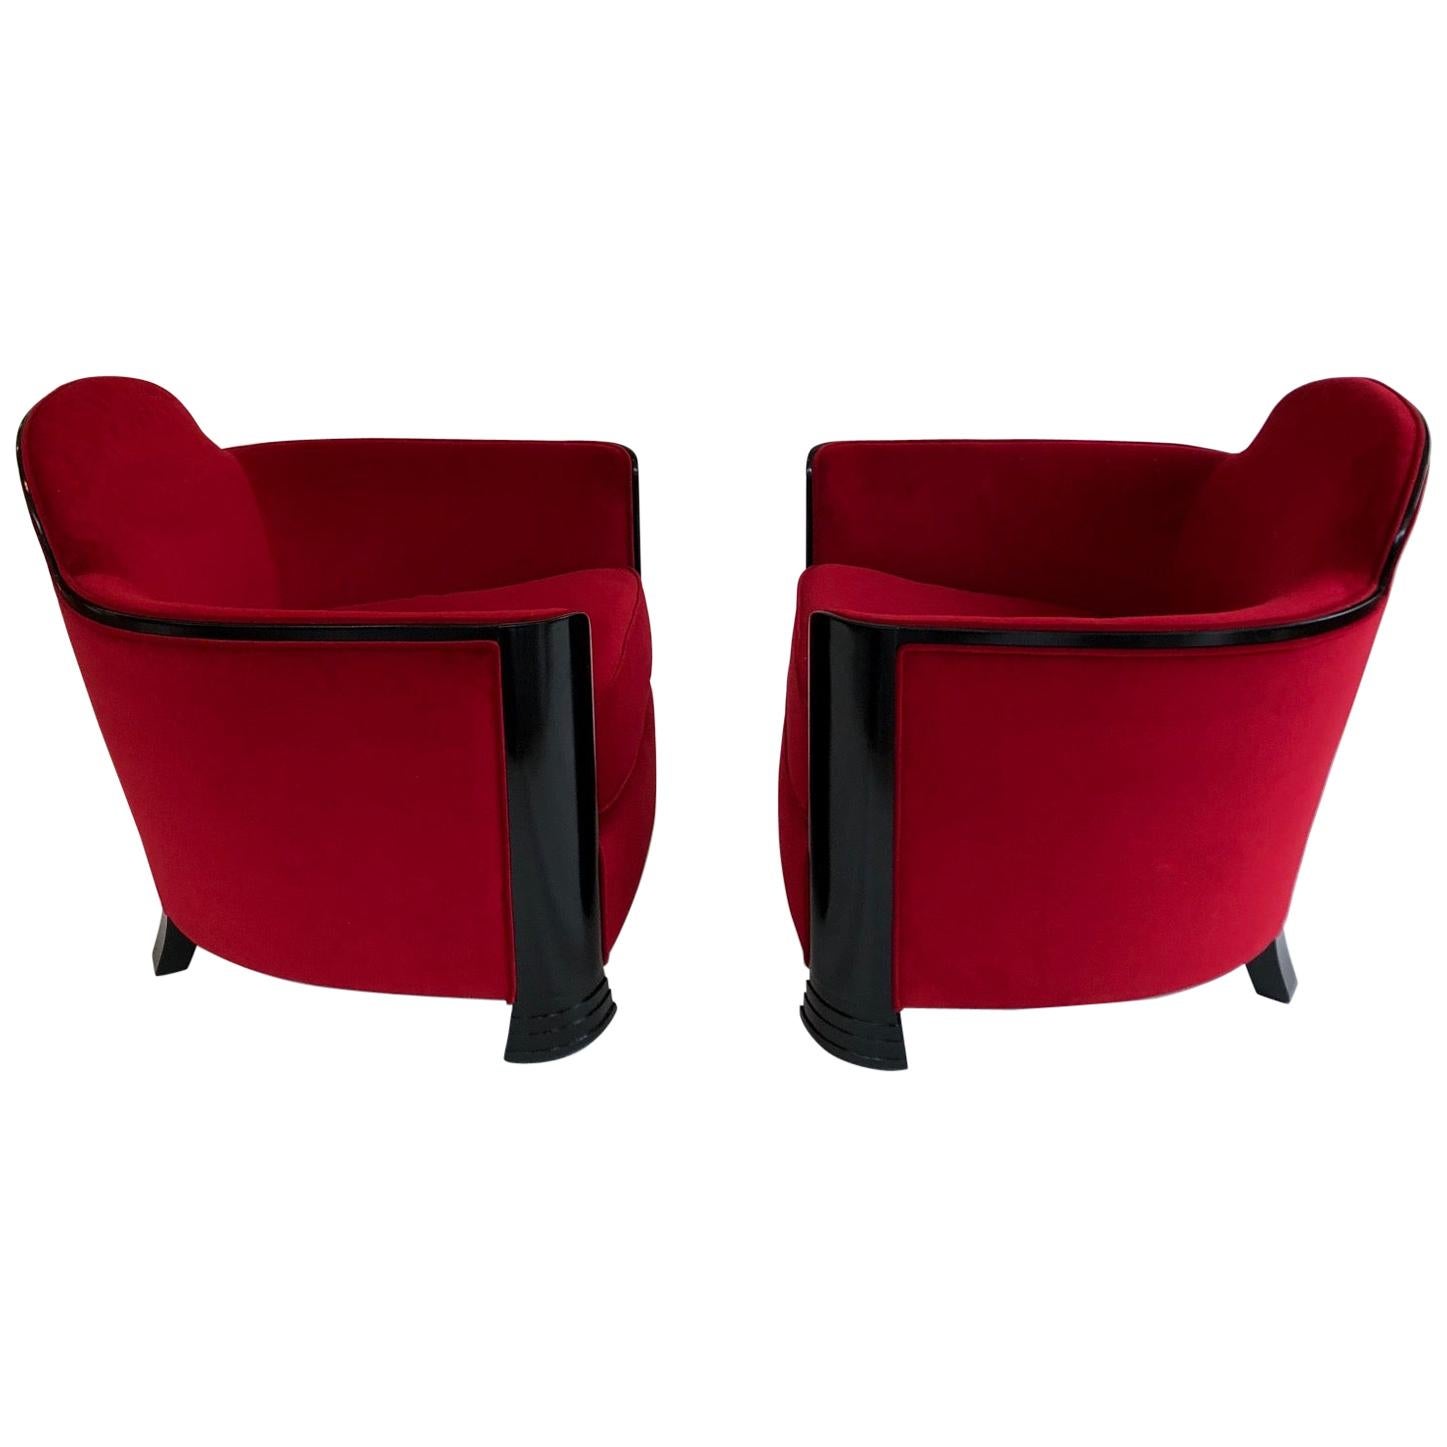 Black and Red Art Deco Modernist Pair of Armchairs, Club Chairs, France, 1930s